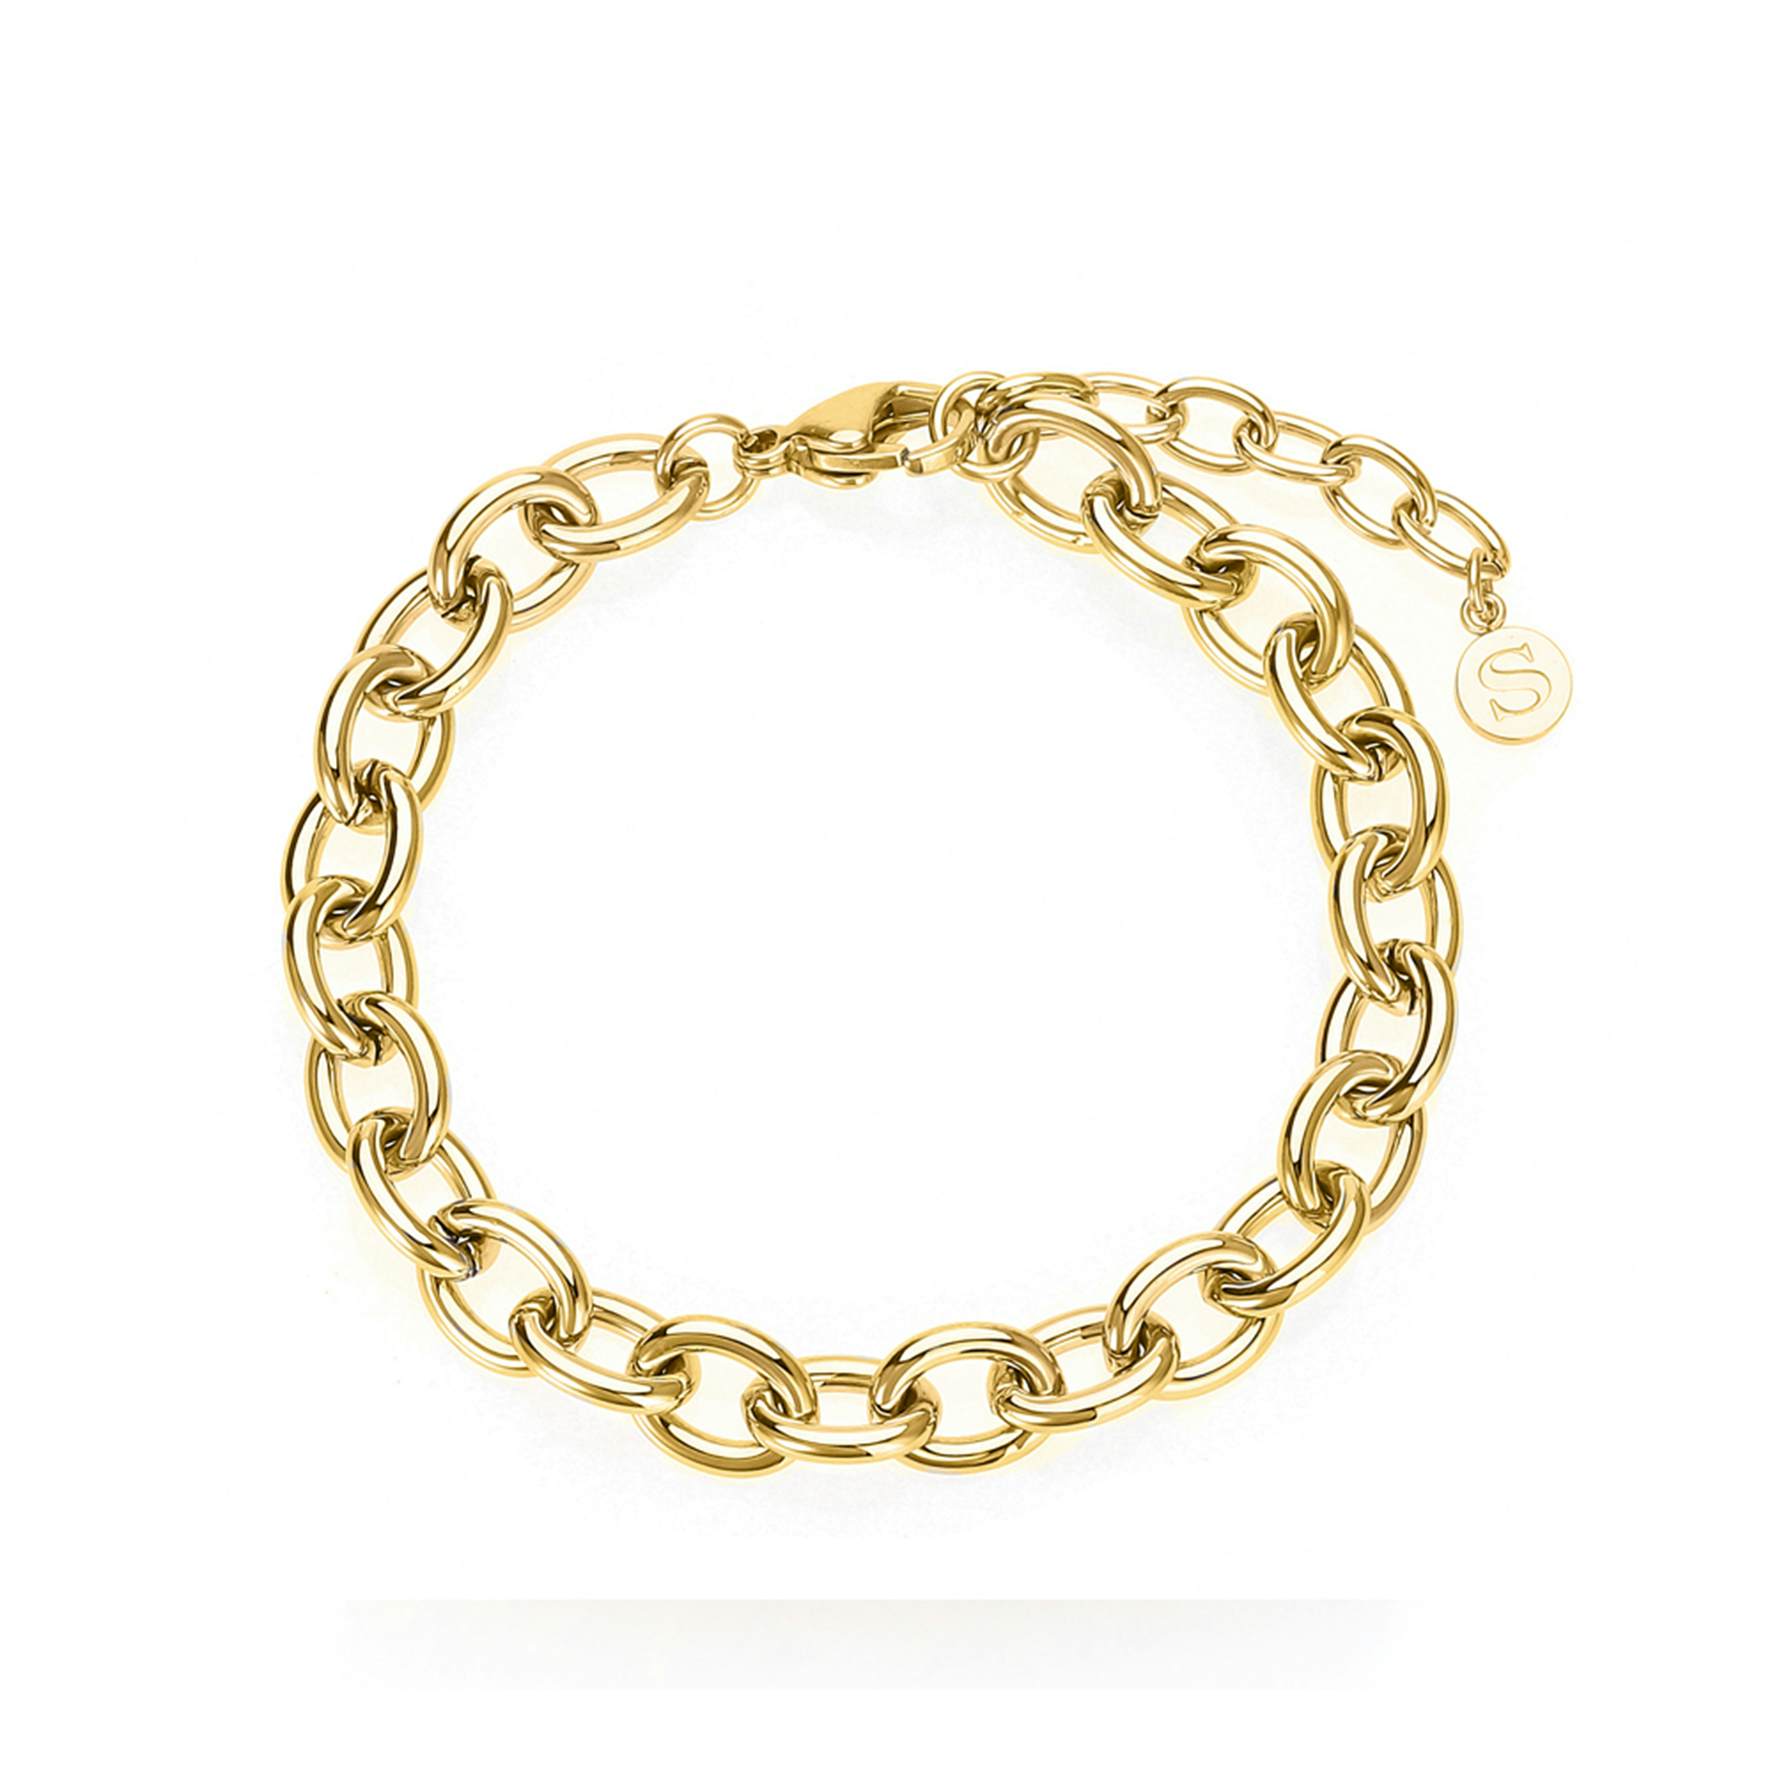 Clara Bracelet from Sistie 2nd in Goldplated Stainless steel